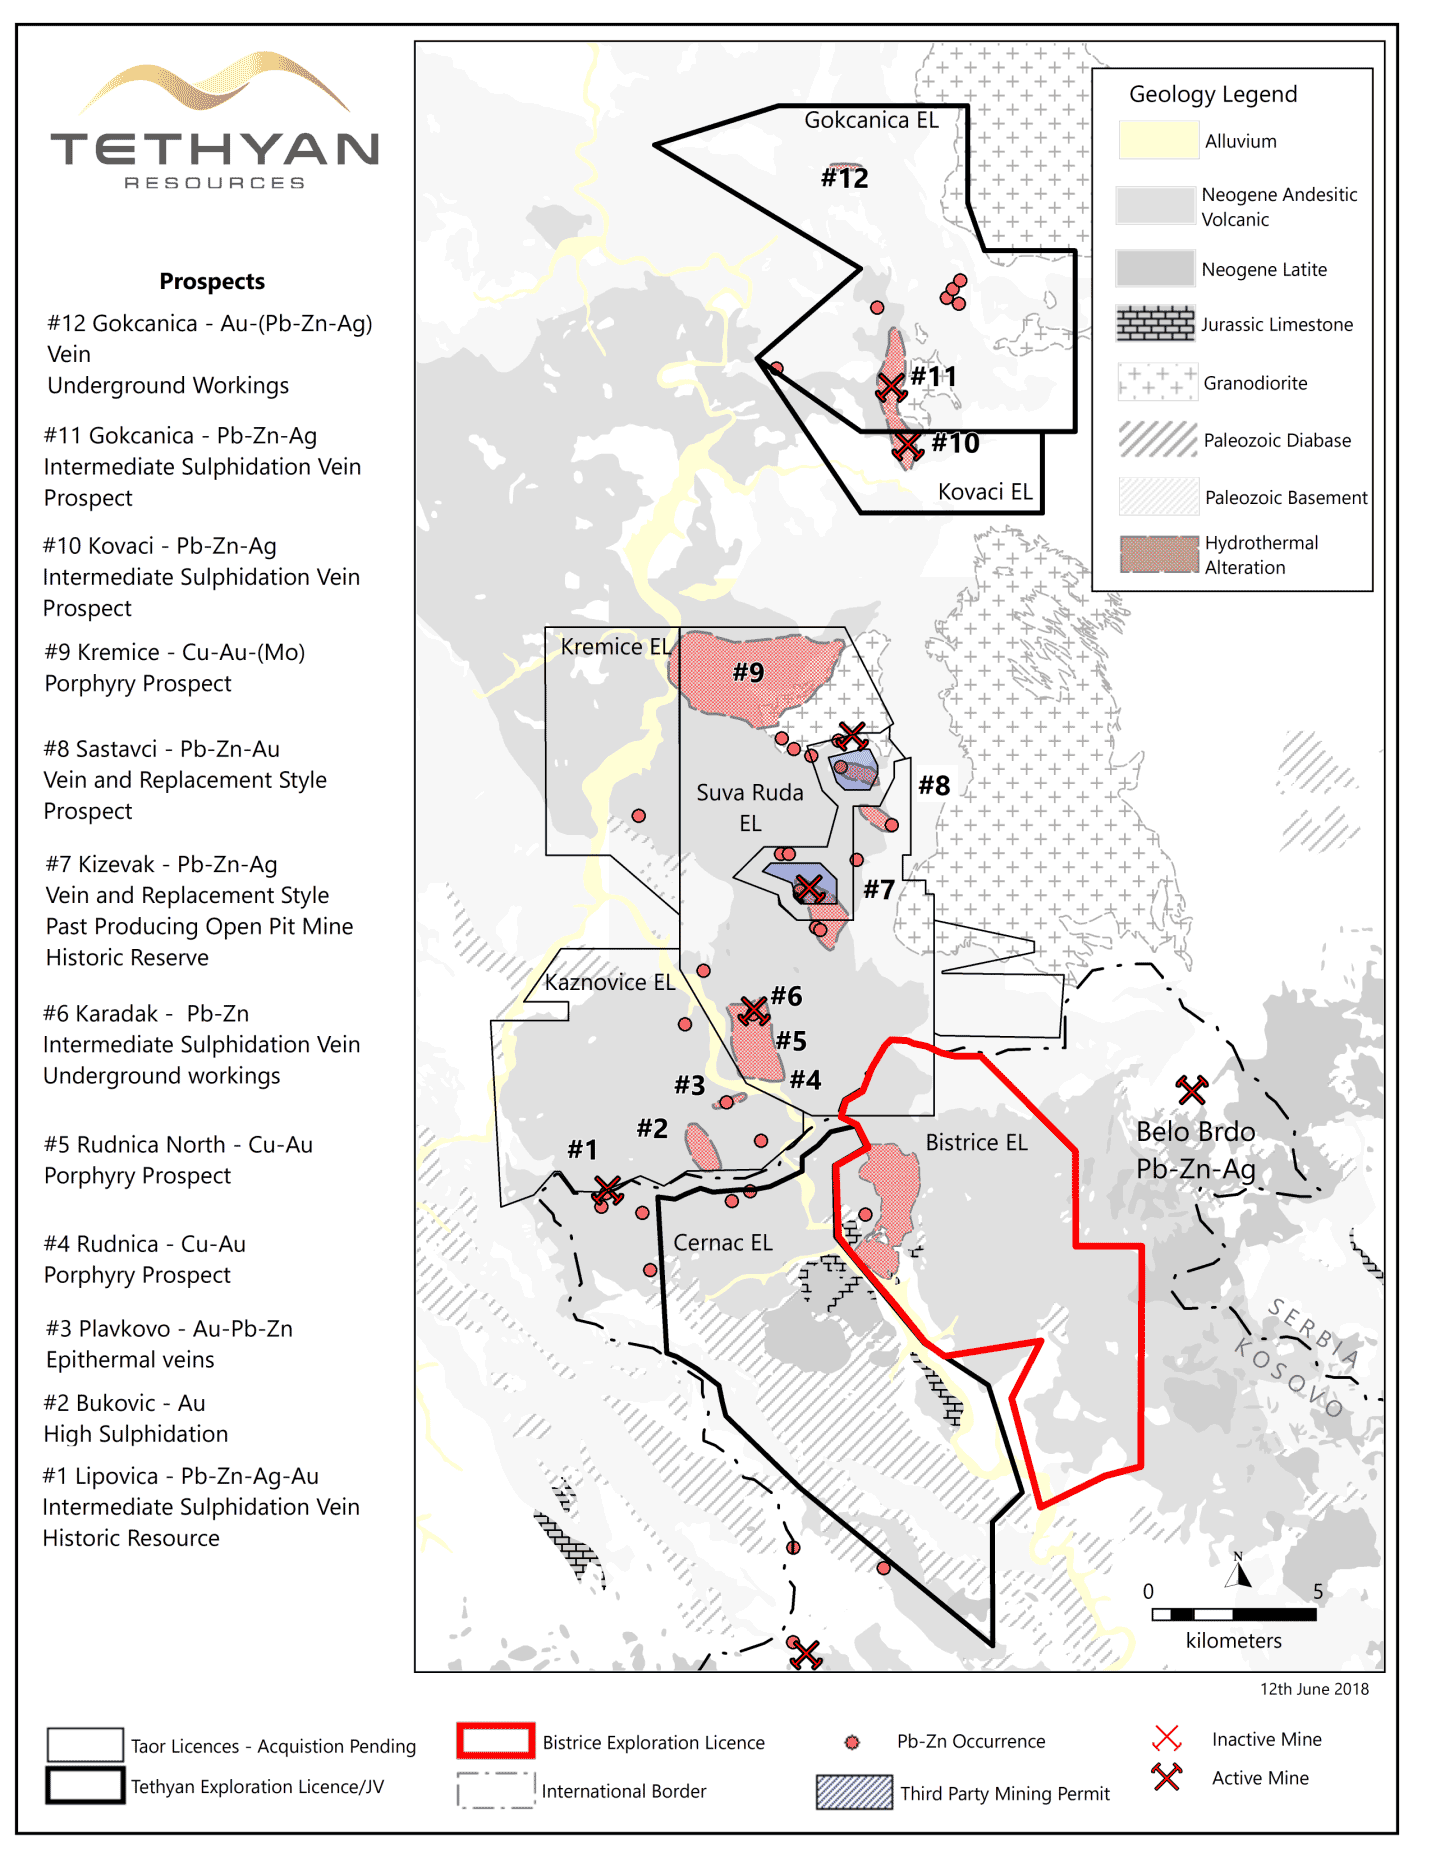 The Bistrice exploration license and other Tethyan exploration licenses shown over the local geology and mineral occurrences of the northern ‘Trepca’ mining district.